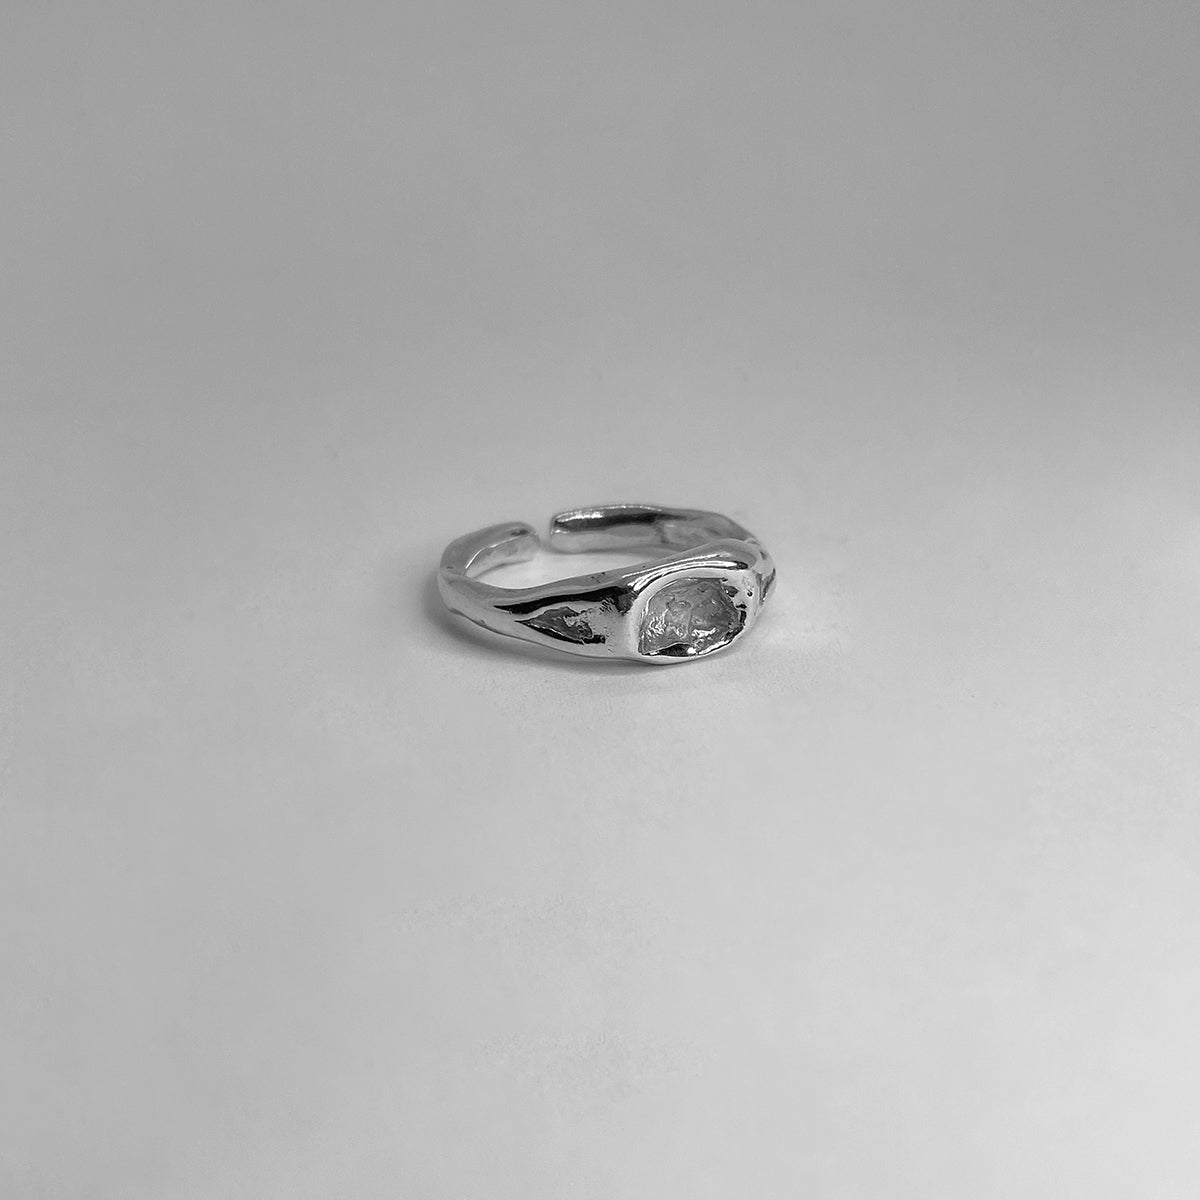 The Lize ring is a handmade piece made of 925 sterling silver. Its surface is raw and glossy